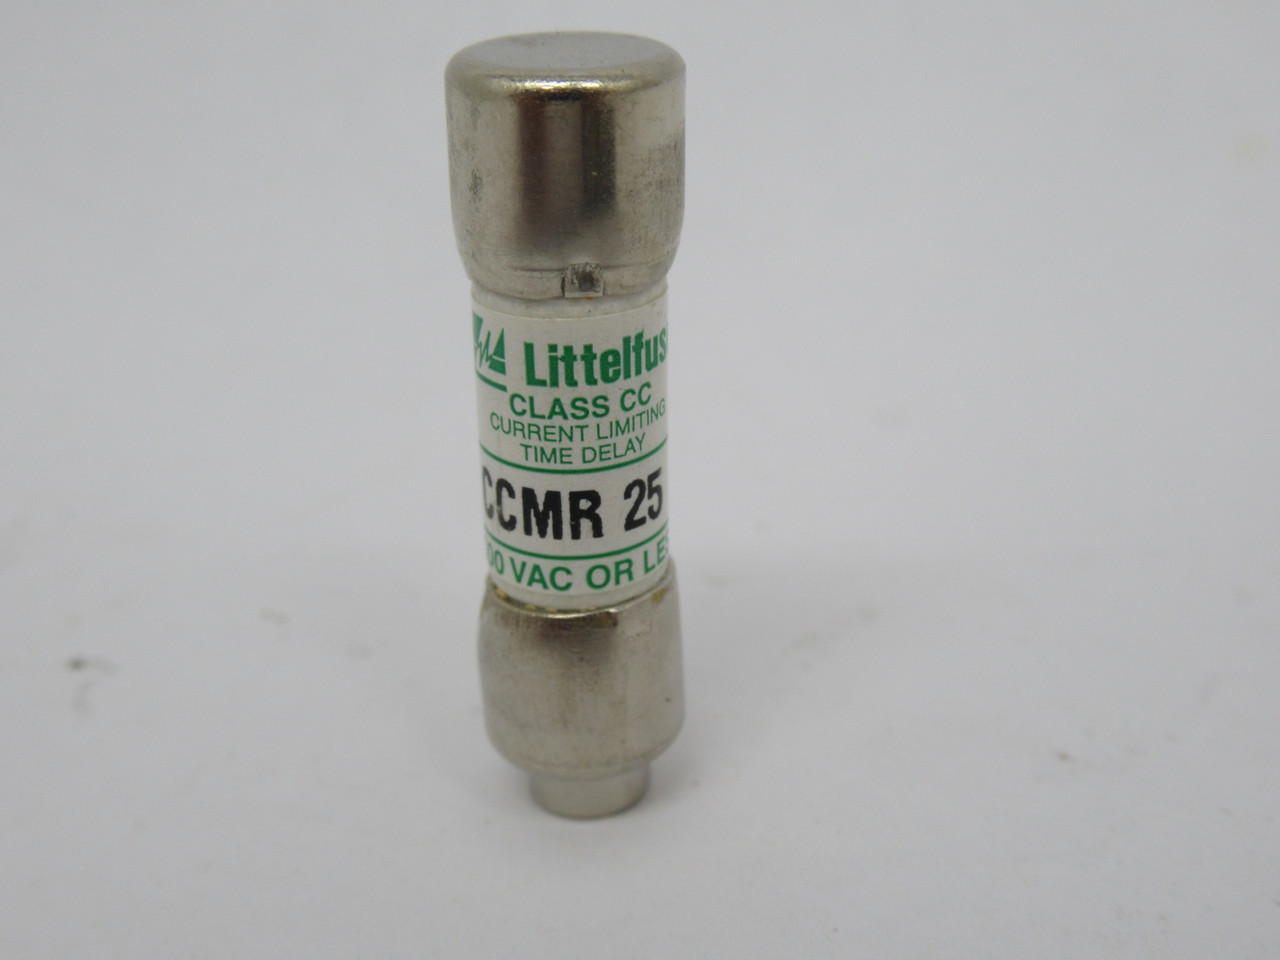 Littelfuse CCMR-25 Time Delay Fuse 25A 600V USED